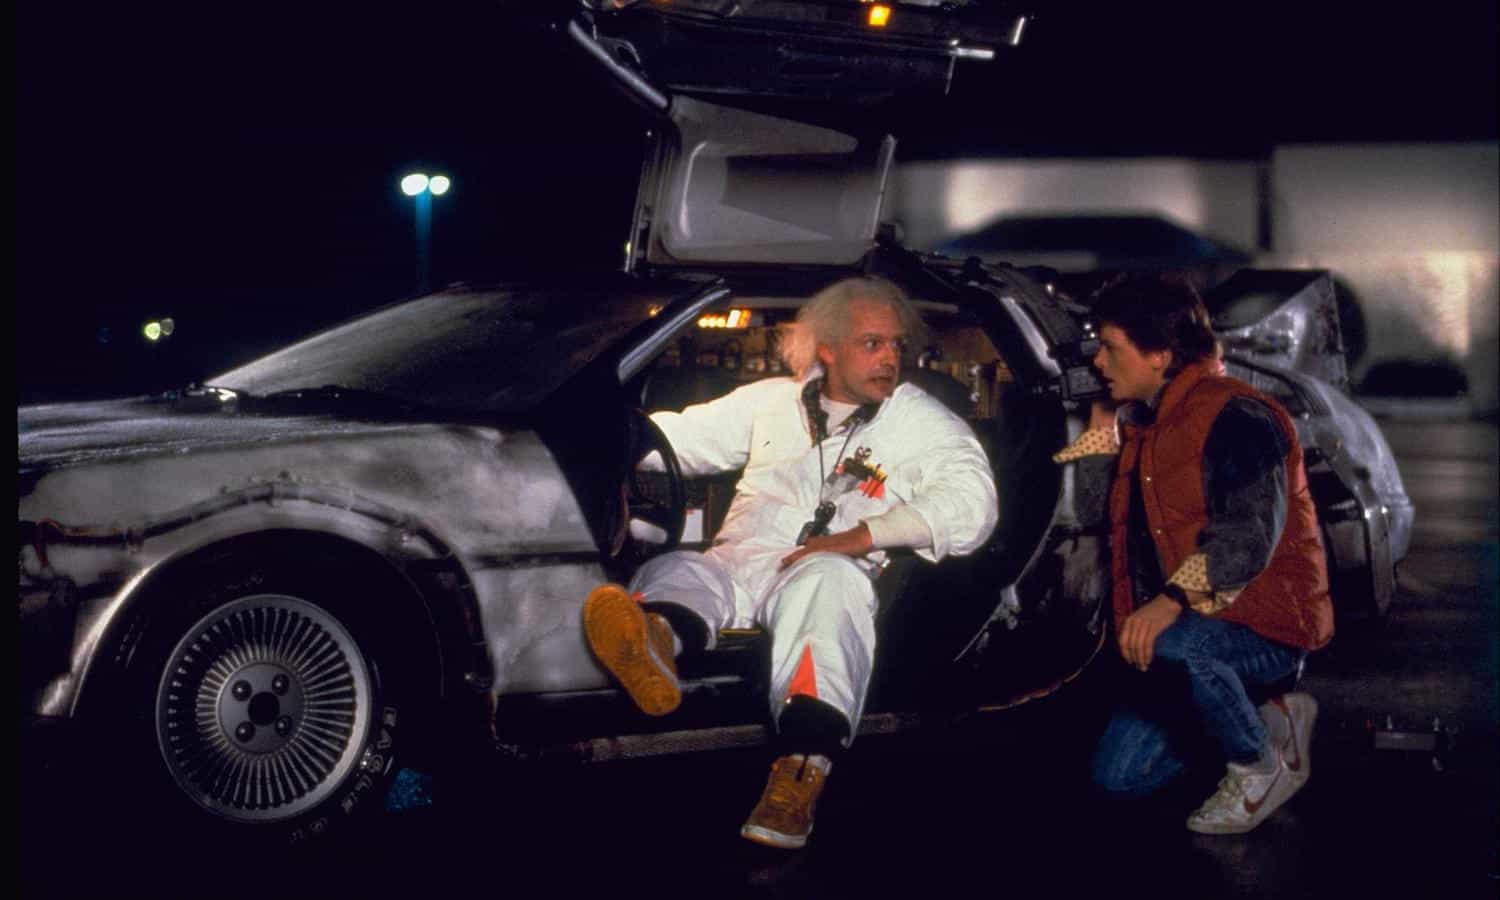 Delorean DMC-12 starring in Back to the Future with Michael J. Fox and Christopher Lloyd